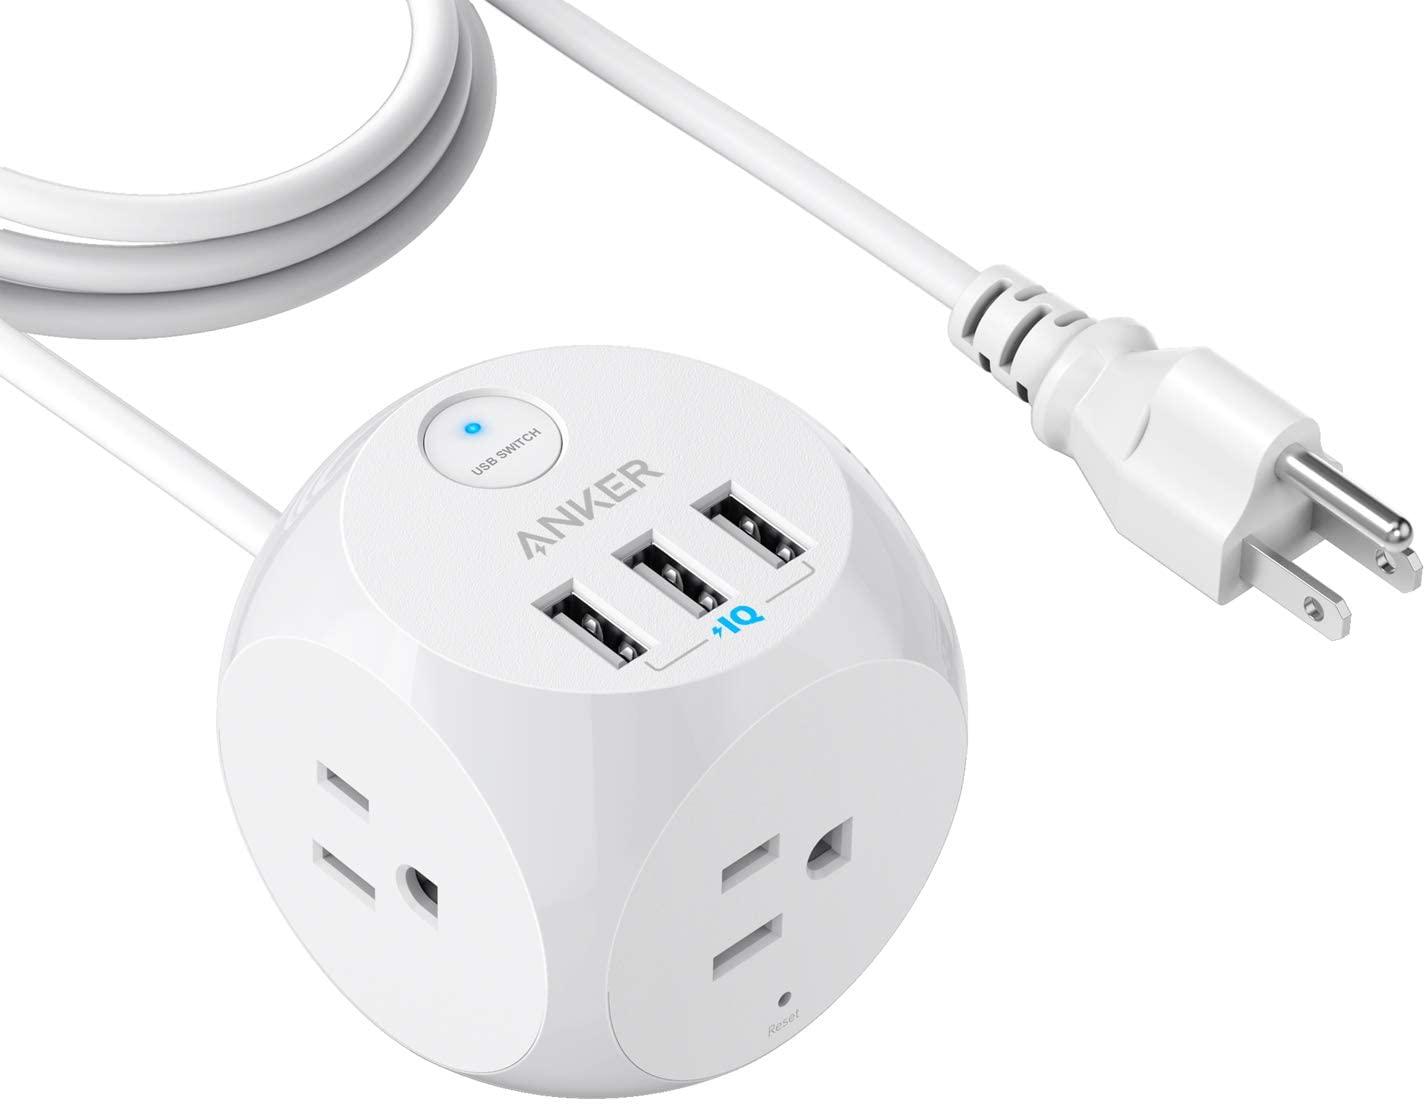 Anker Power Strip with 3 Outlets for $16.14